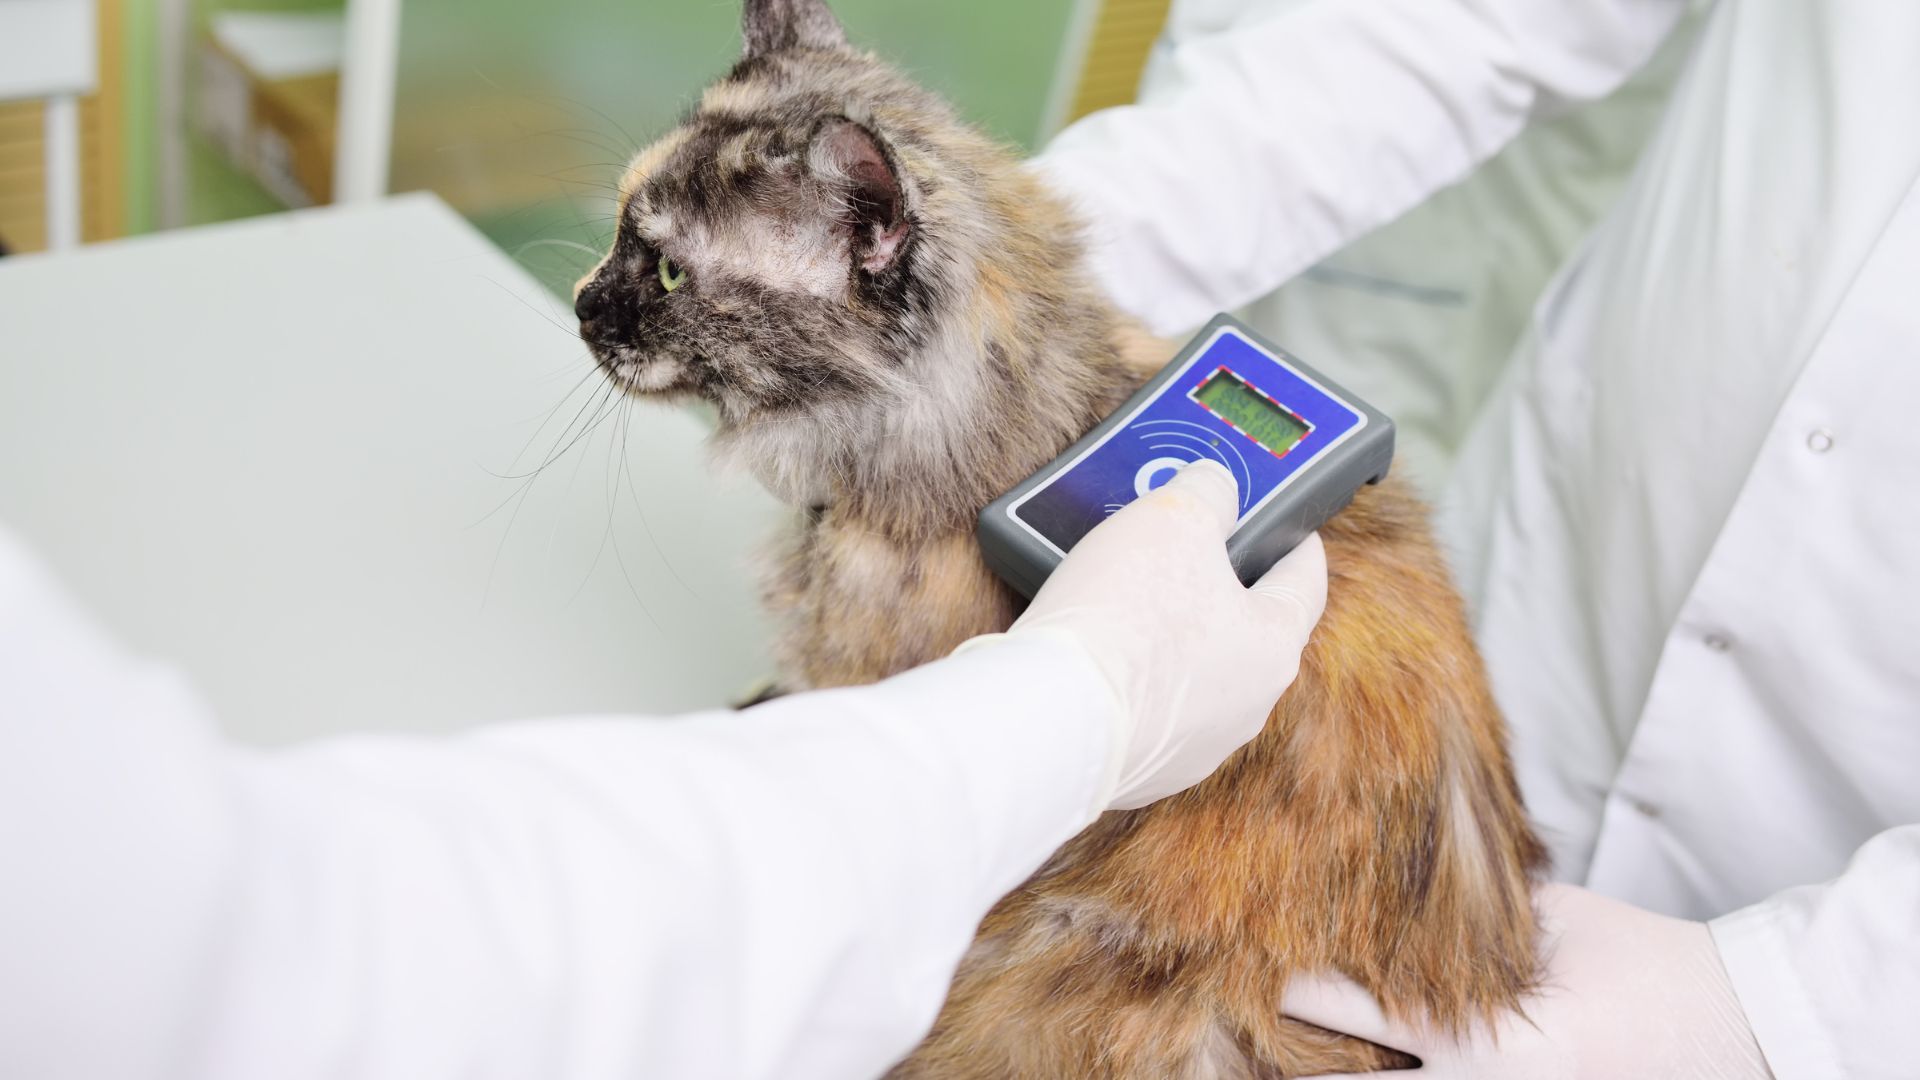 A veterinarian is scanning a cat for a micro chip